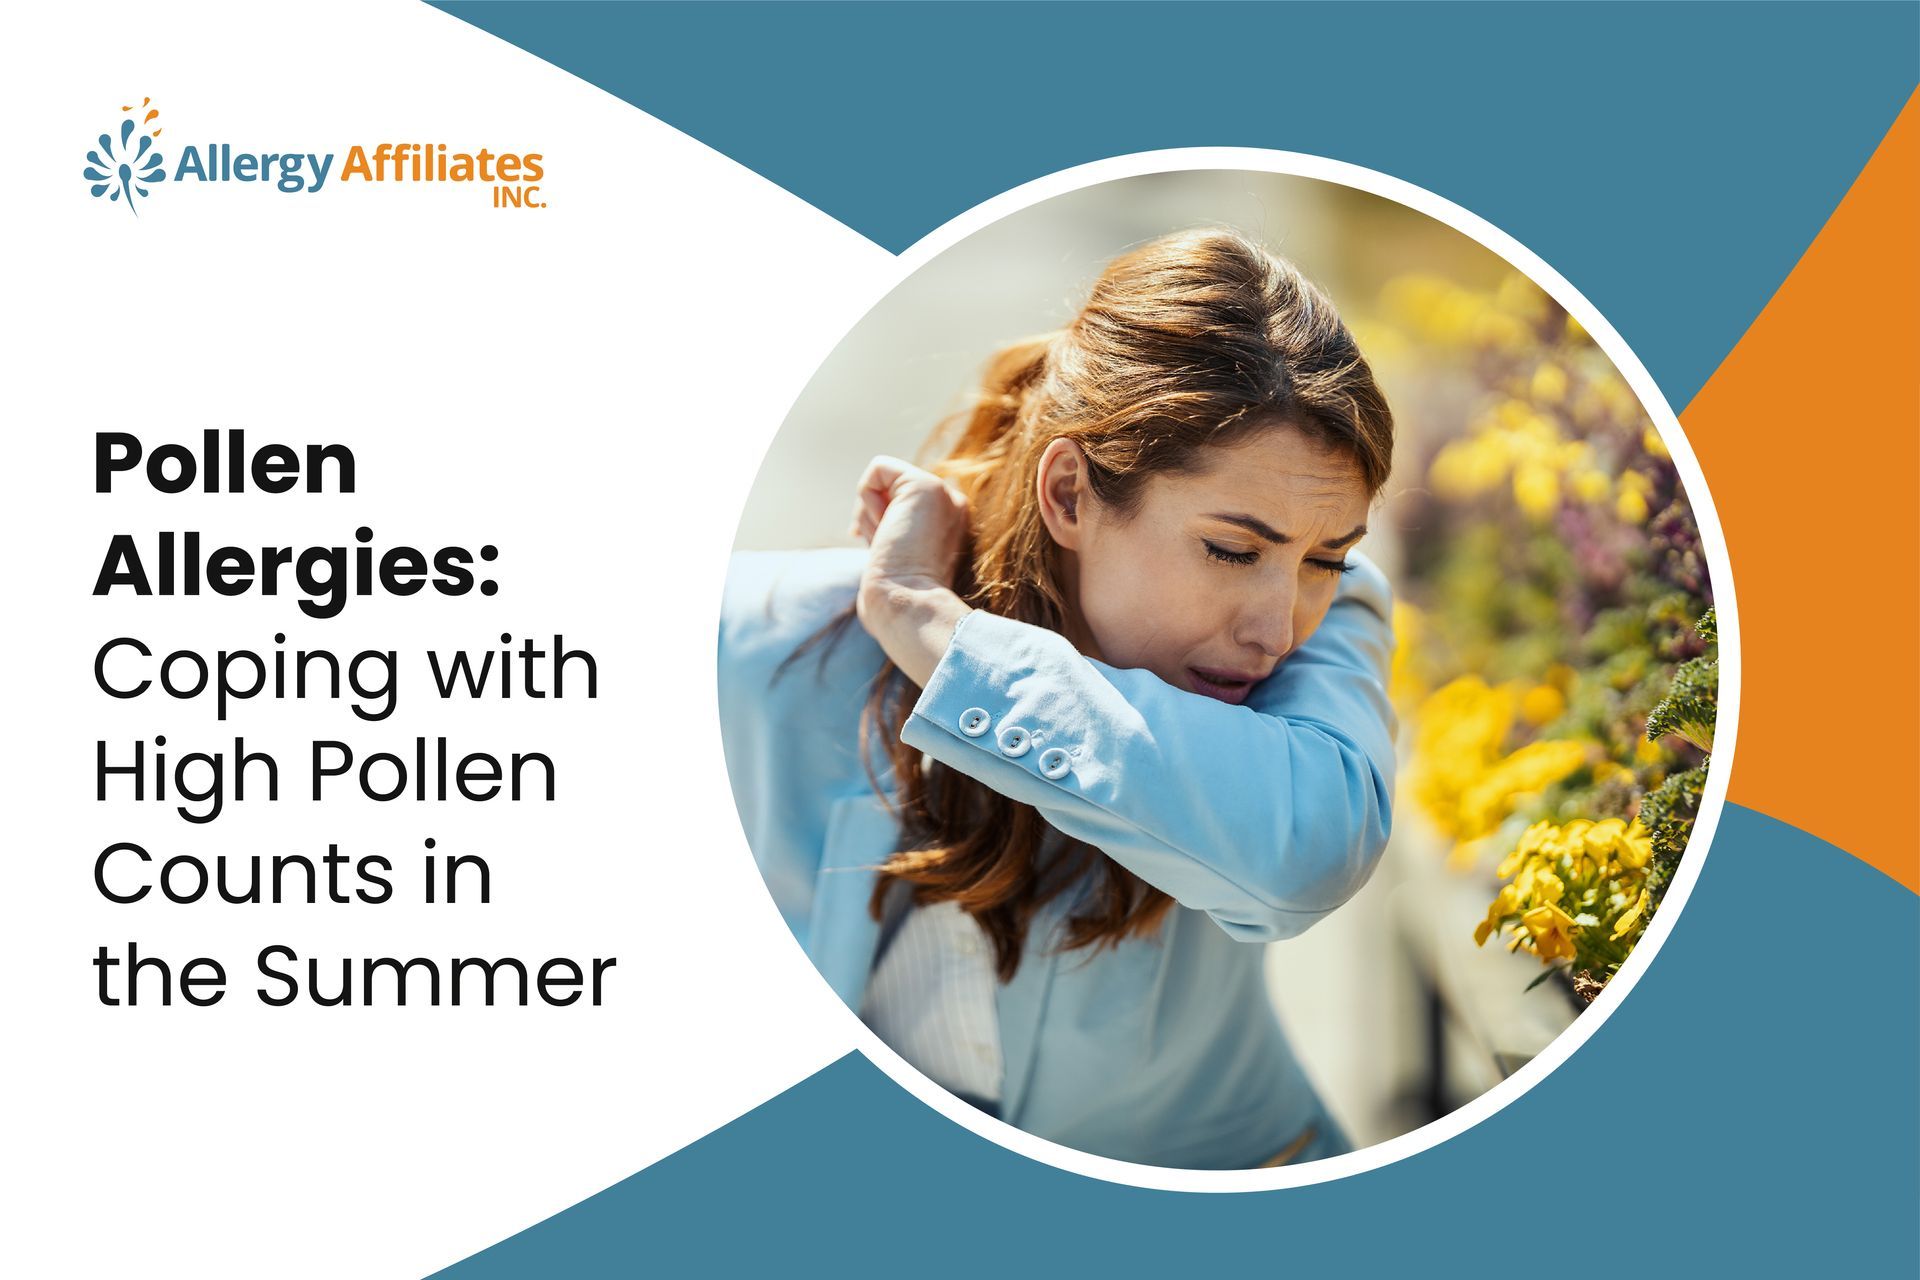 Pollen Allergies: Coping with High Pollen Counts in the Summer